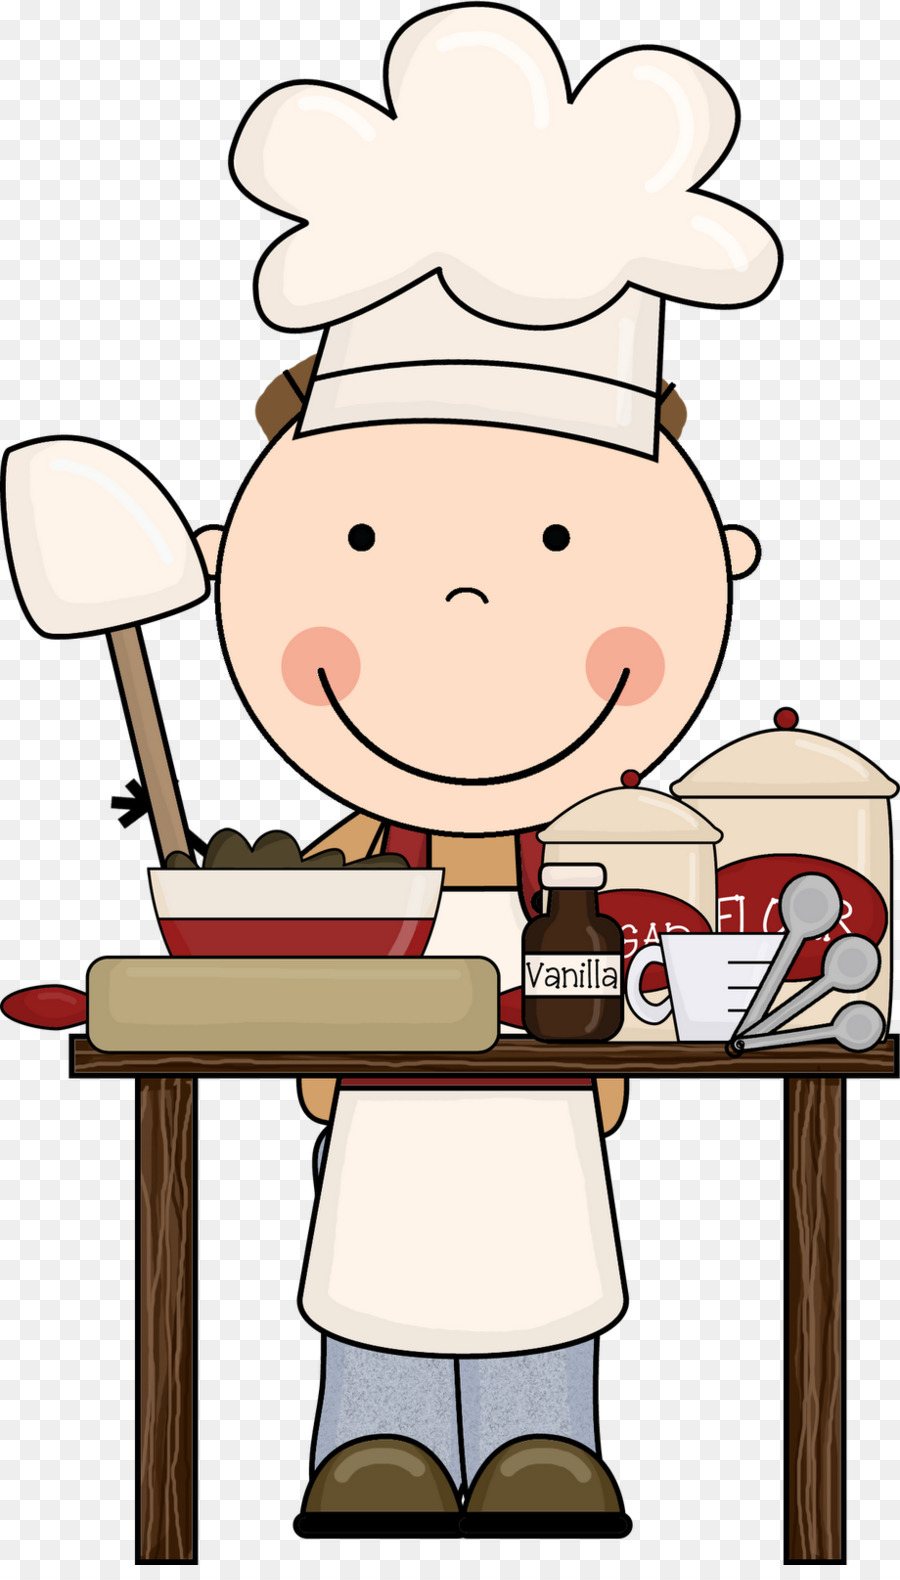 Cooking Child Baking Clip art - Cooking Pictures For Kids png download - 920*1600 - Free Transparent Cooking png Download.